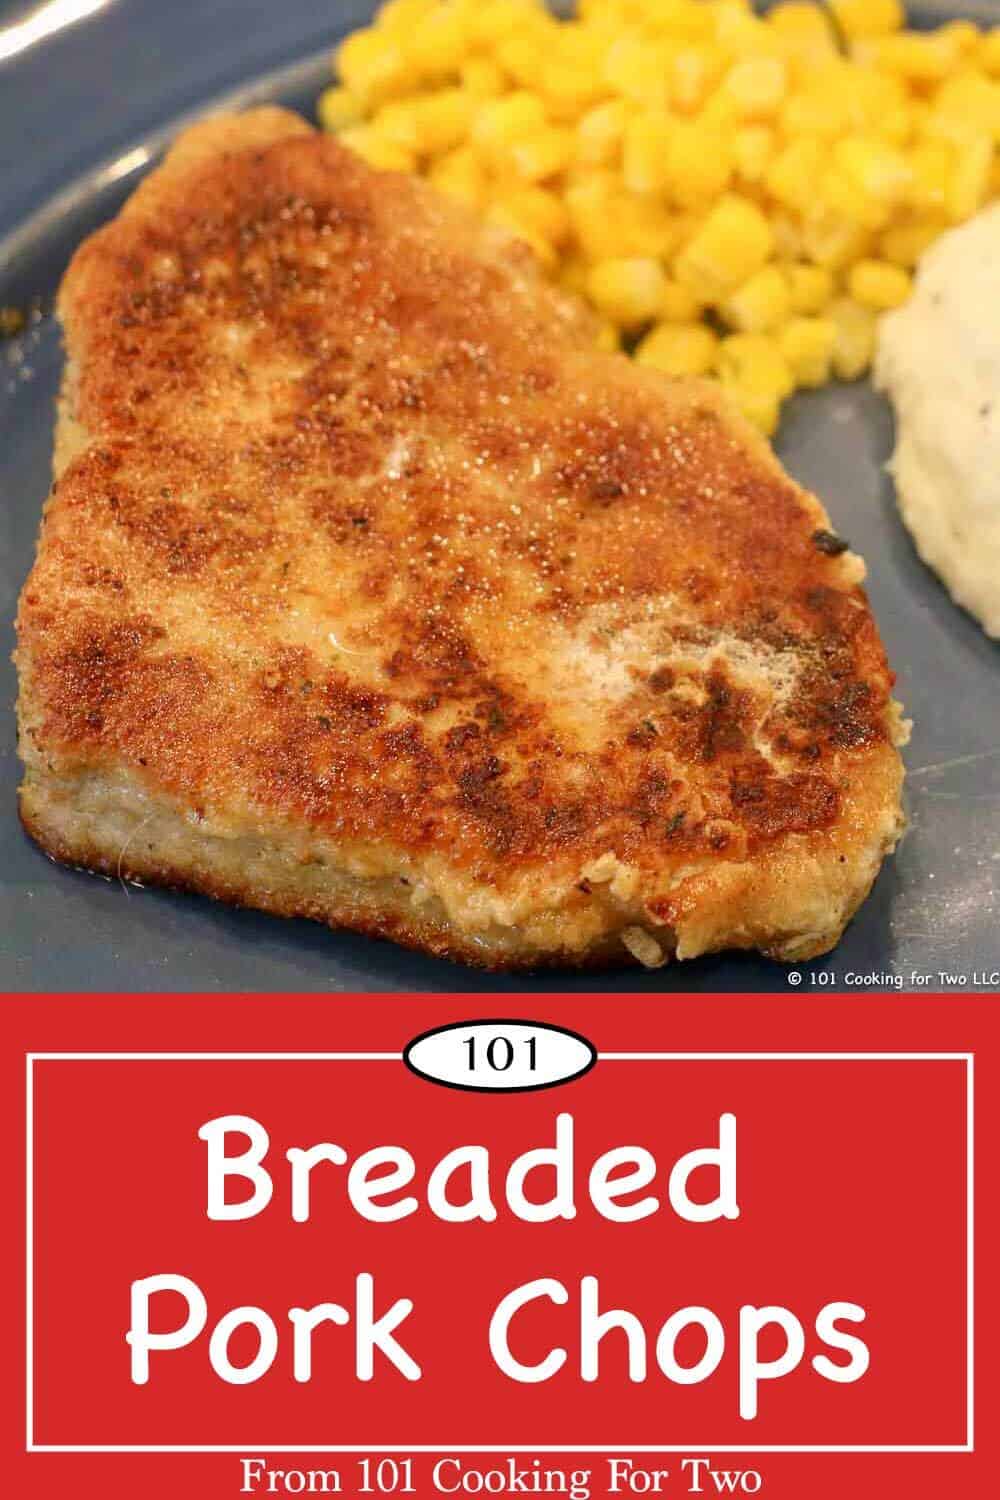 Time for a fork-tender crispy breaded pork chop you will love. Done in less 30-minutes with these easy to follow step by step photo instructions.#BreadedPorkChops #CrispyPorkChops